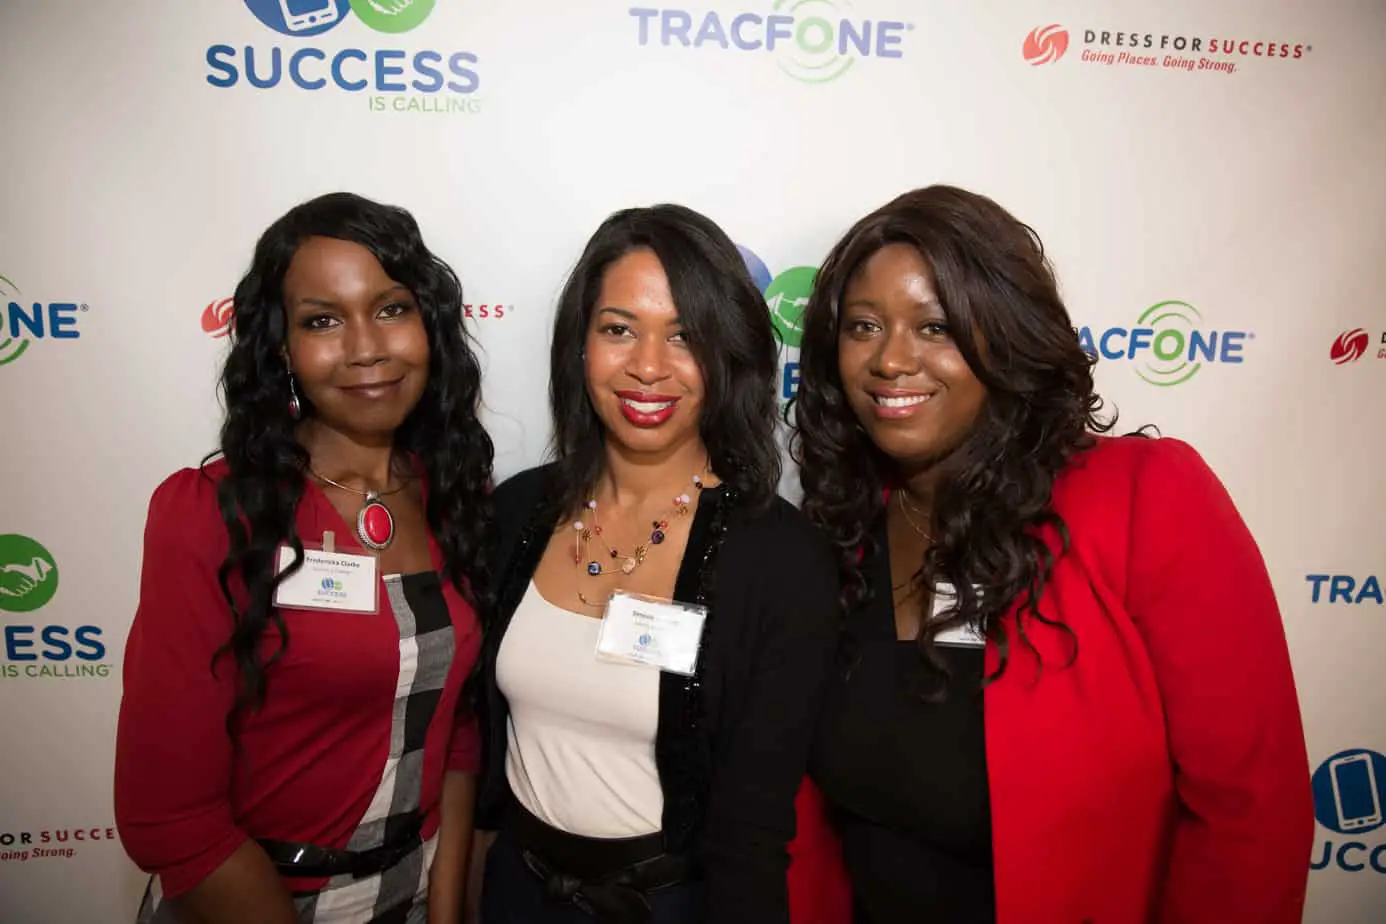 success is calling women - TracFone and Dress for Success Expand Success is Calling to Empower Women